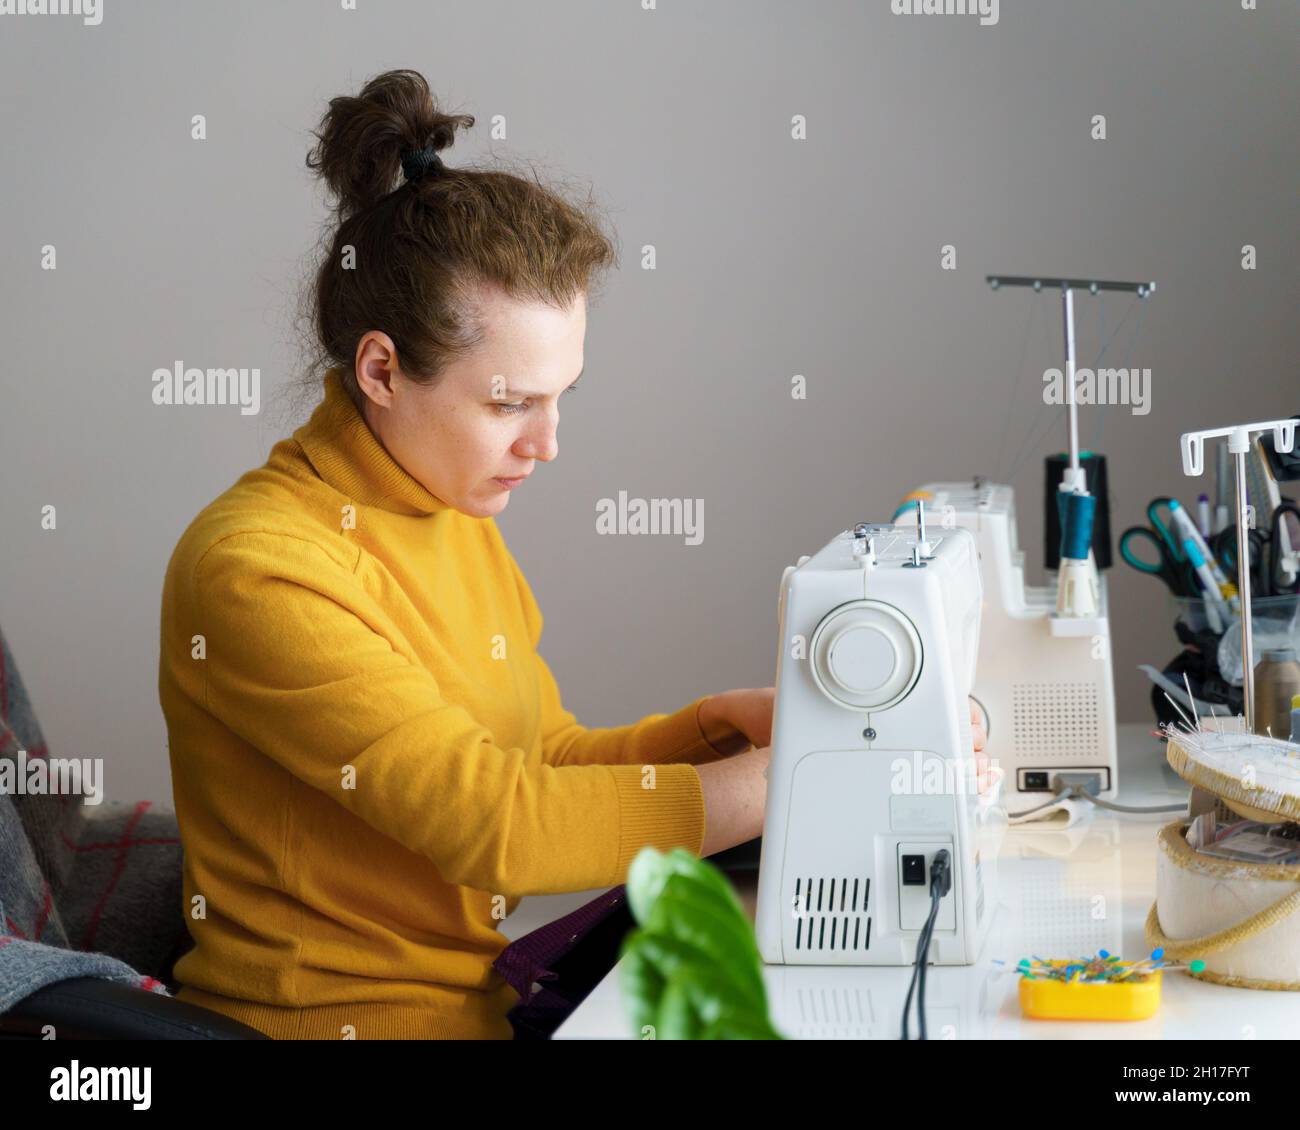 A girl is sewing on a machine. Mom shows how to work with equipment.  Close-up. Stock Photo by ©Alexeg84 314794668